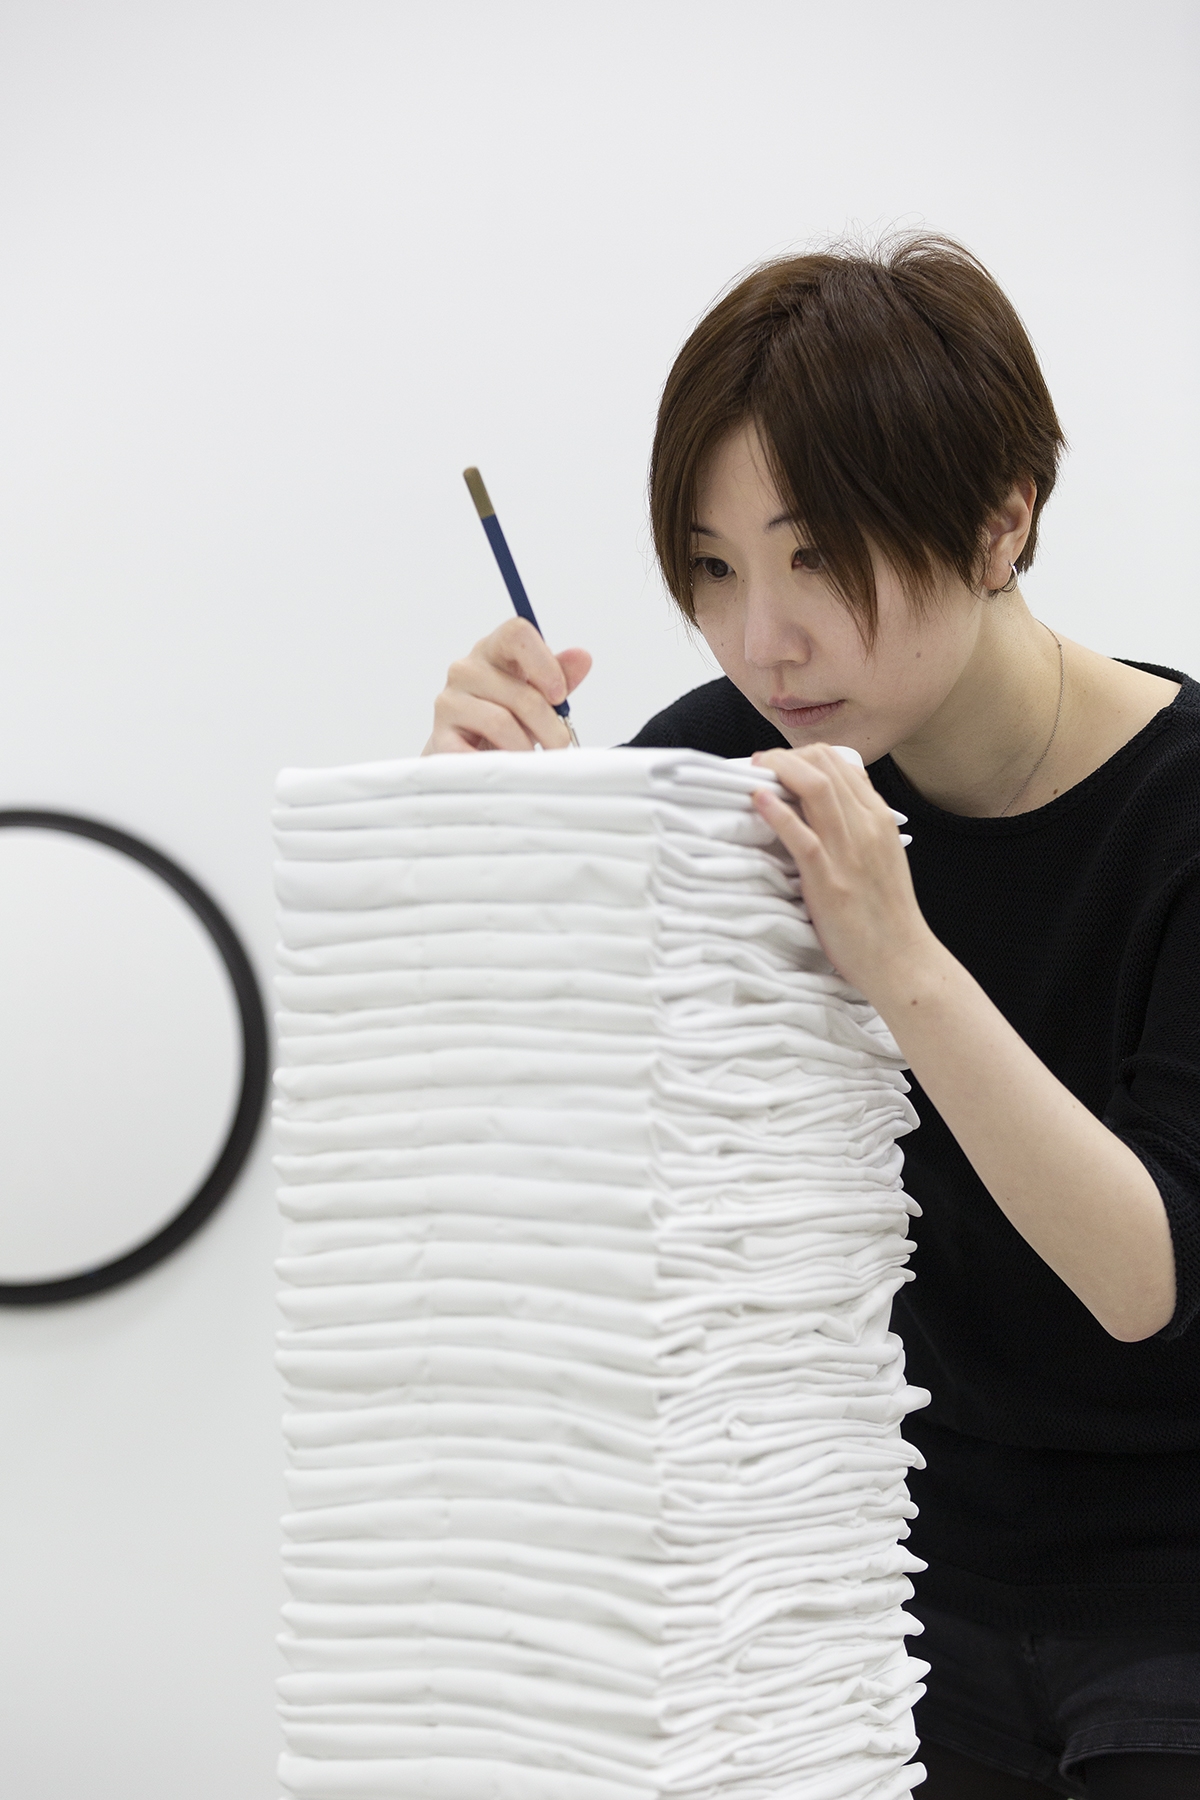 A person wearing a dark t-shirt leans on top of a stack of folded white fabric. She holds a pencil and uses it to mark the top of the fabric